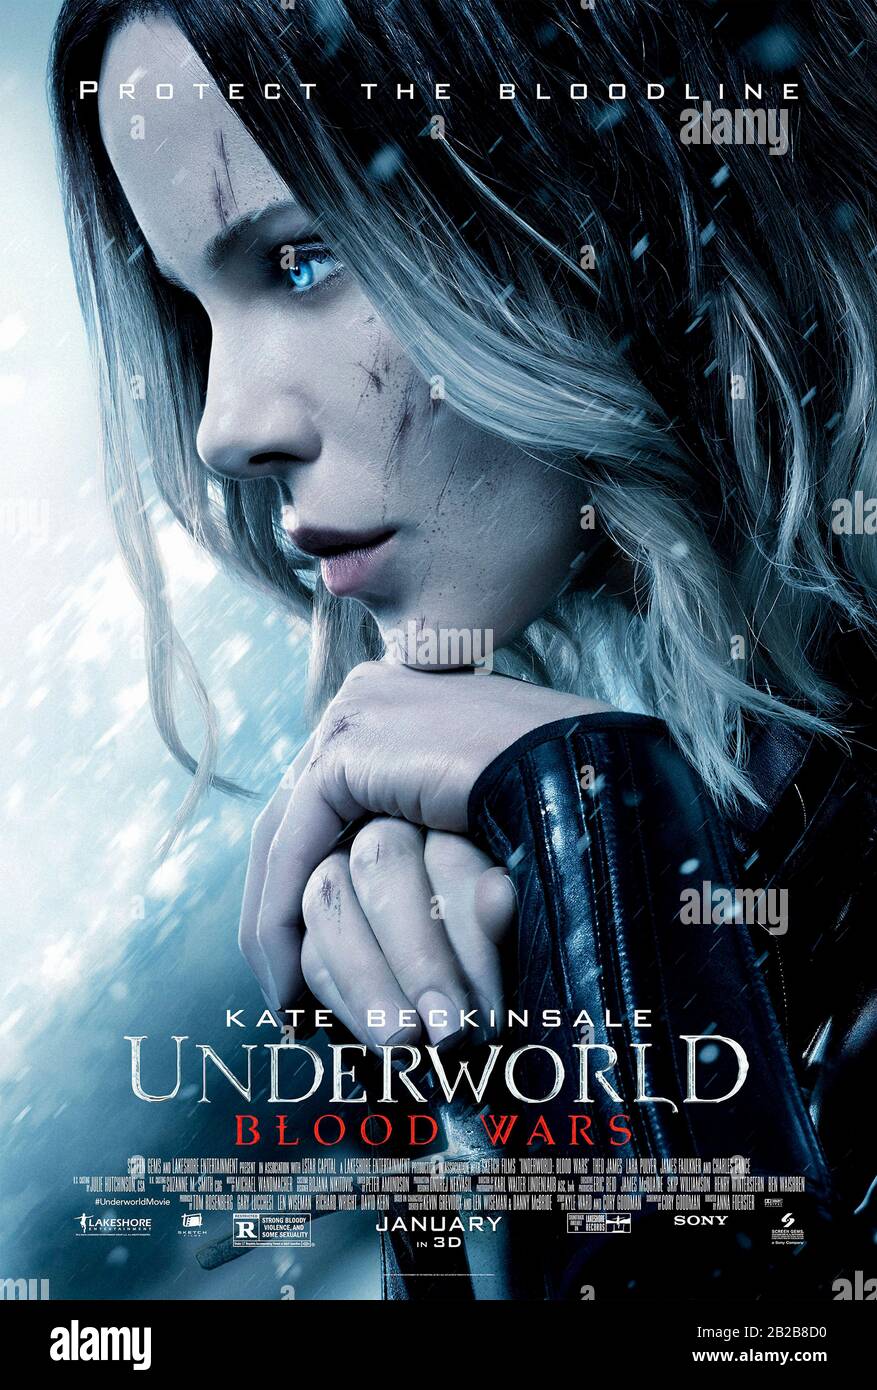 Underworld: Blood Wars (2016) directed by Anna Foerster and starring Kate Beckinsale, Theo James, Tobias Menzies and Charles Dance. Fifth installment in the Underworld franchise sees Selene the vampire death dealer try to end the eternal war between vampires and werewolves . Stock Photo